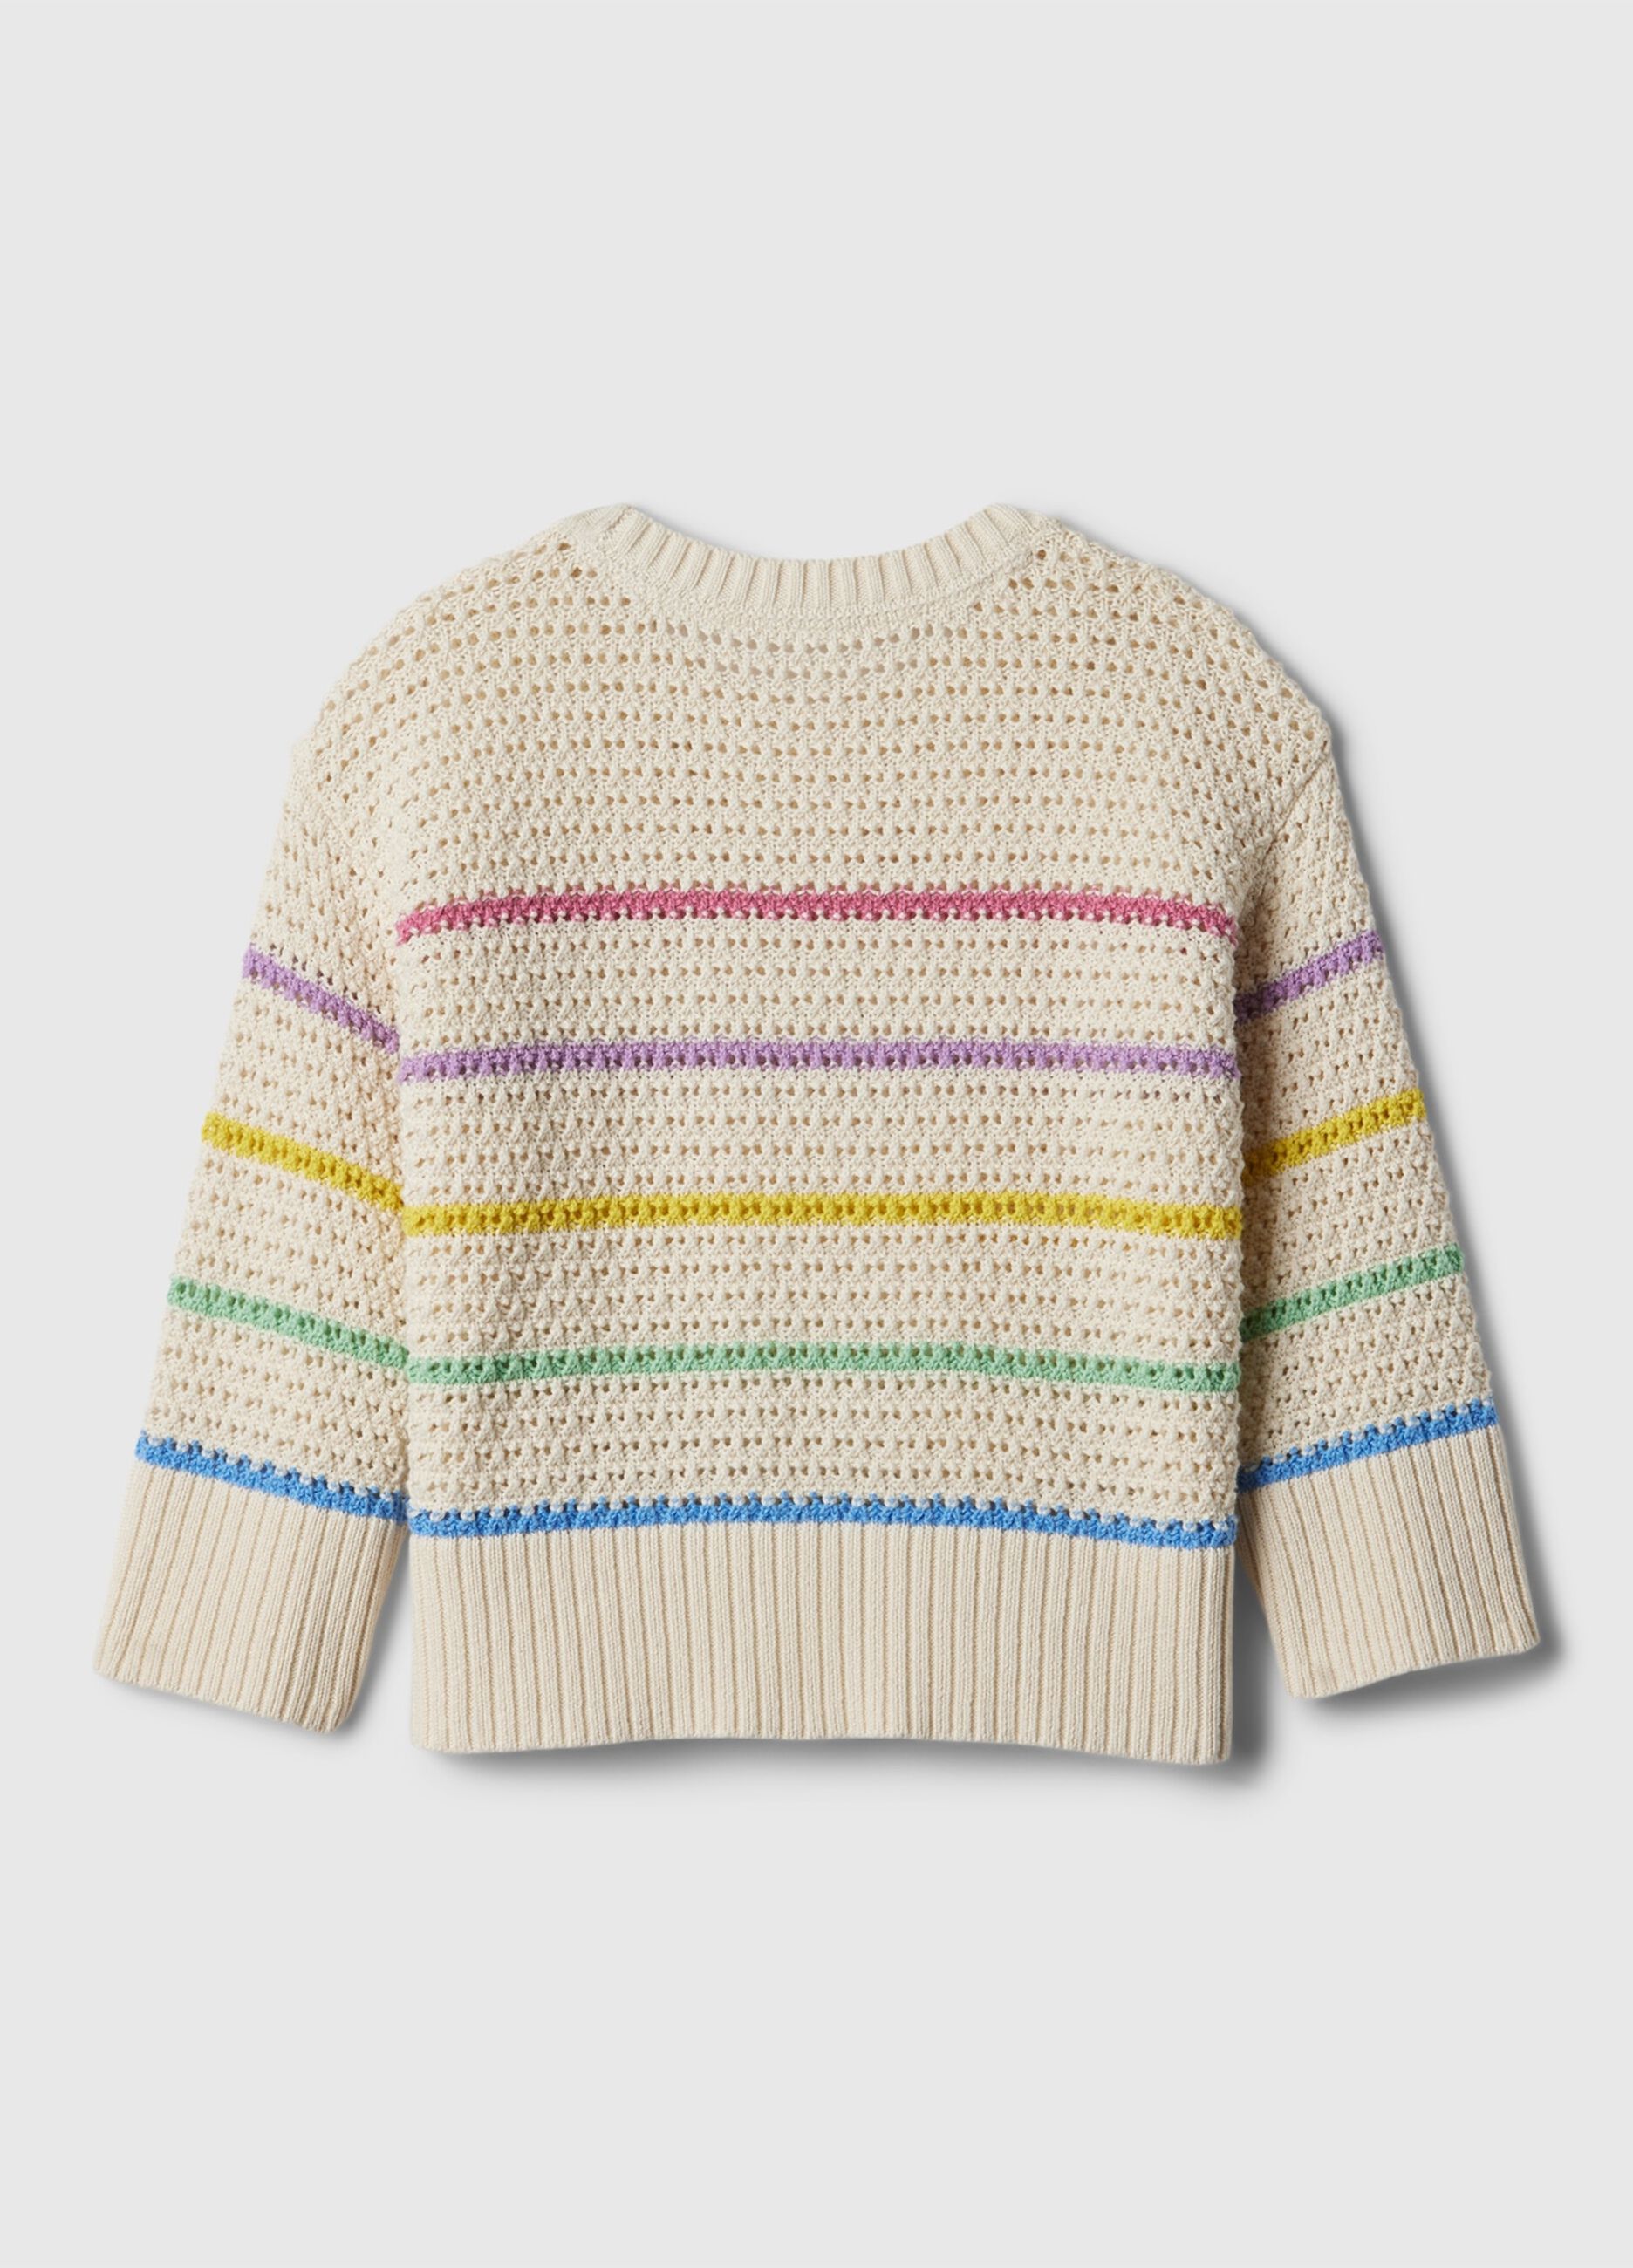 Striped pullover with openwork design